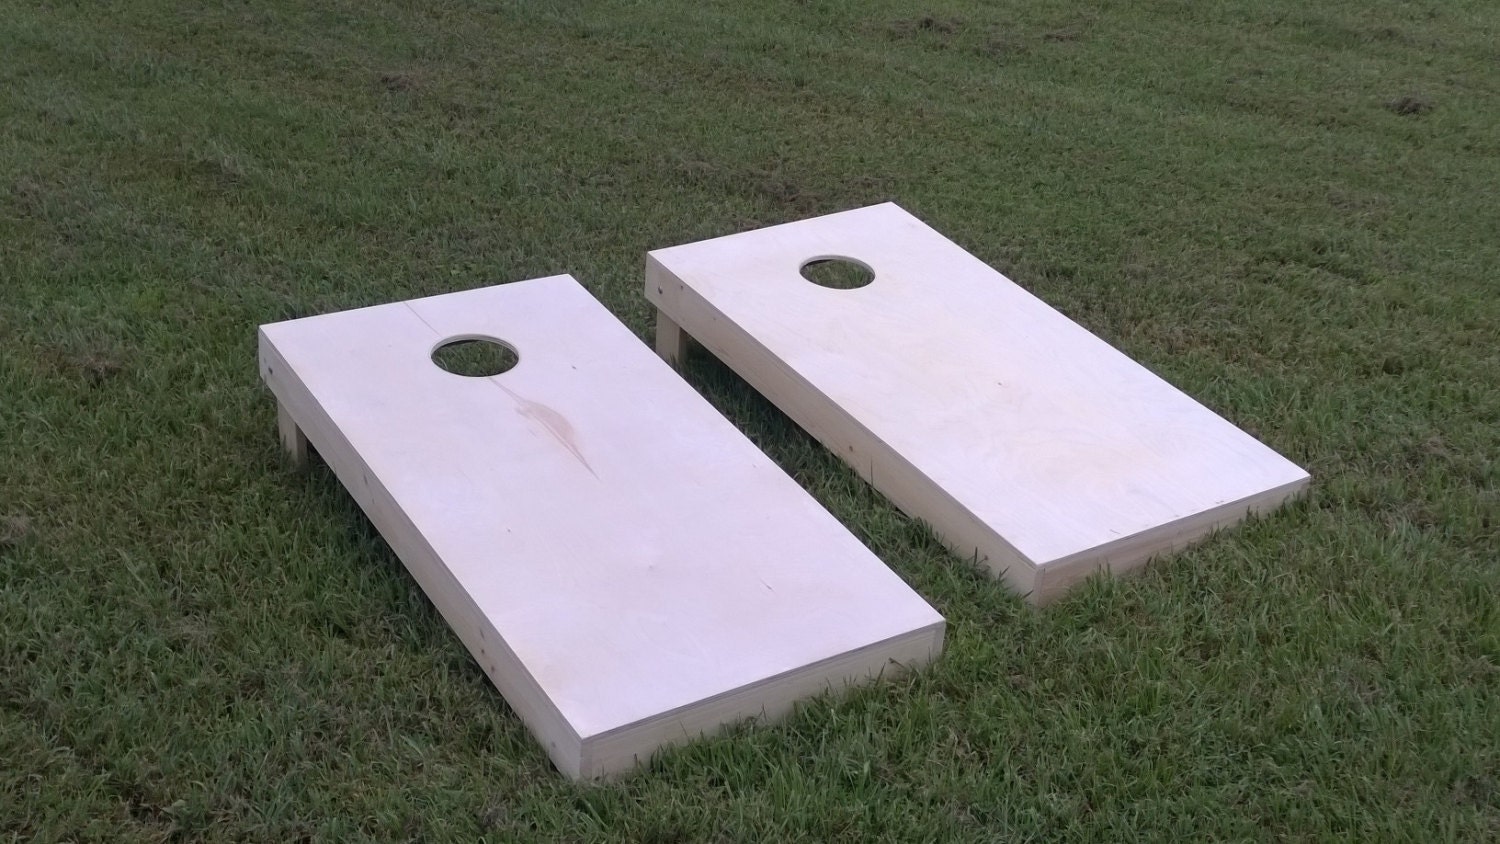 These are our DIY finished cornhole board game sets. 